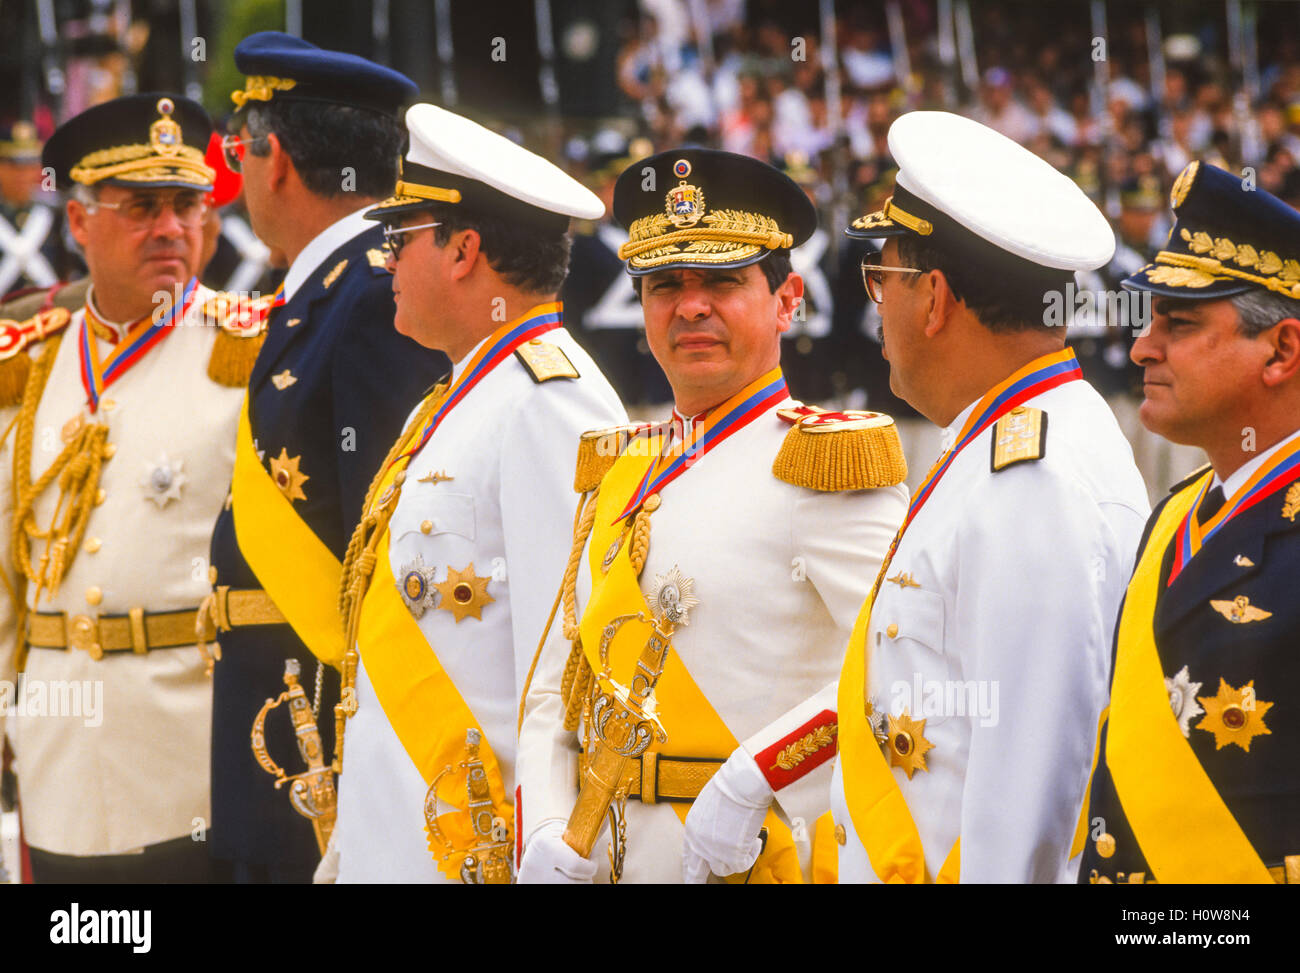 CARACAS, VENEZUELA - Officers attend July 5th Independence Day military parade at Los Proceres parade grounds on July 5, 1988. Stock Photo